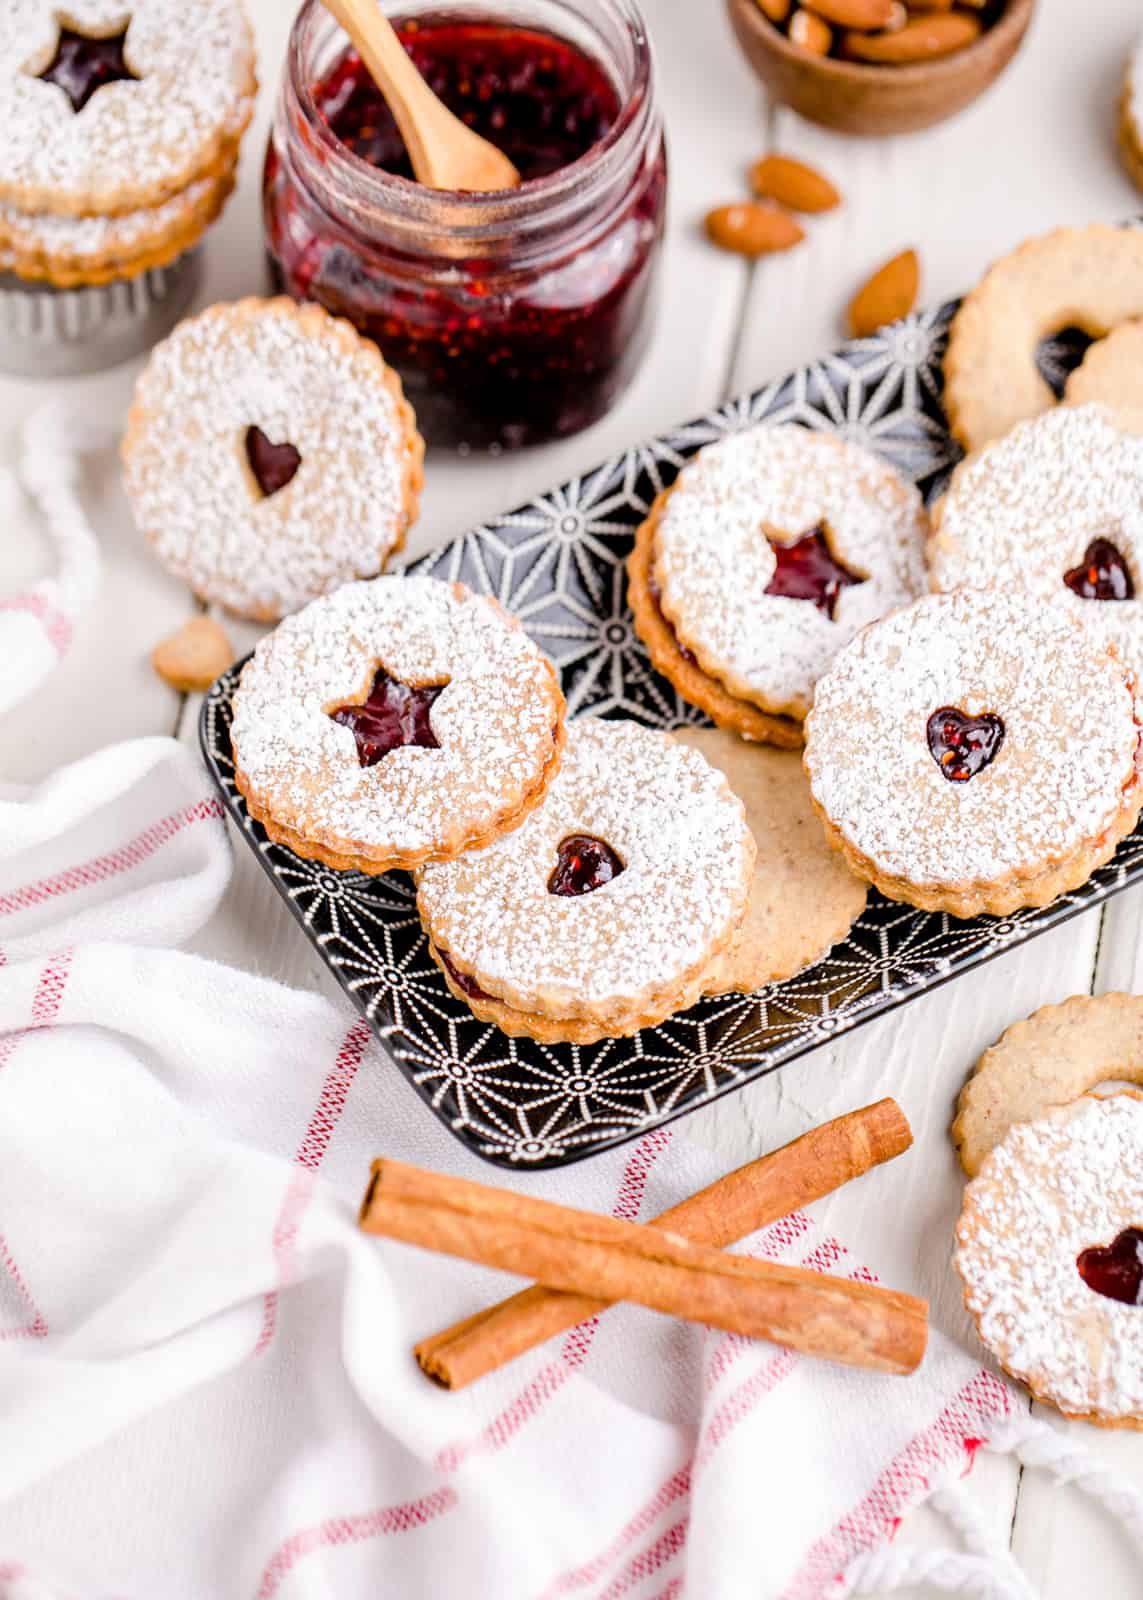 Linzer Cookies on tray stacked next to jam with cinnamon sticks.